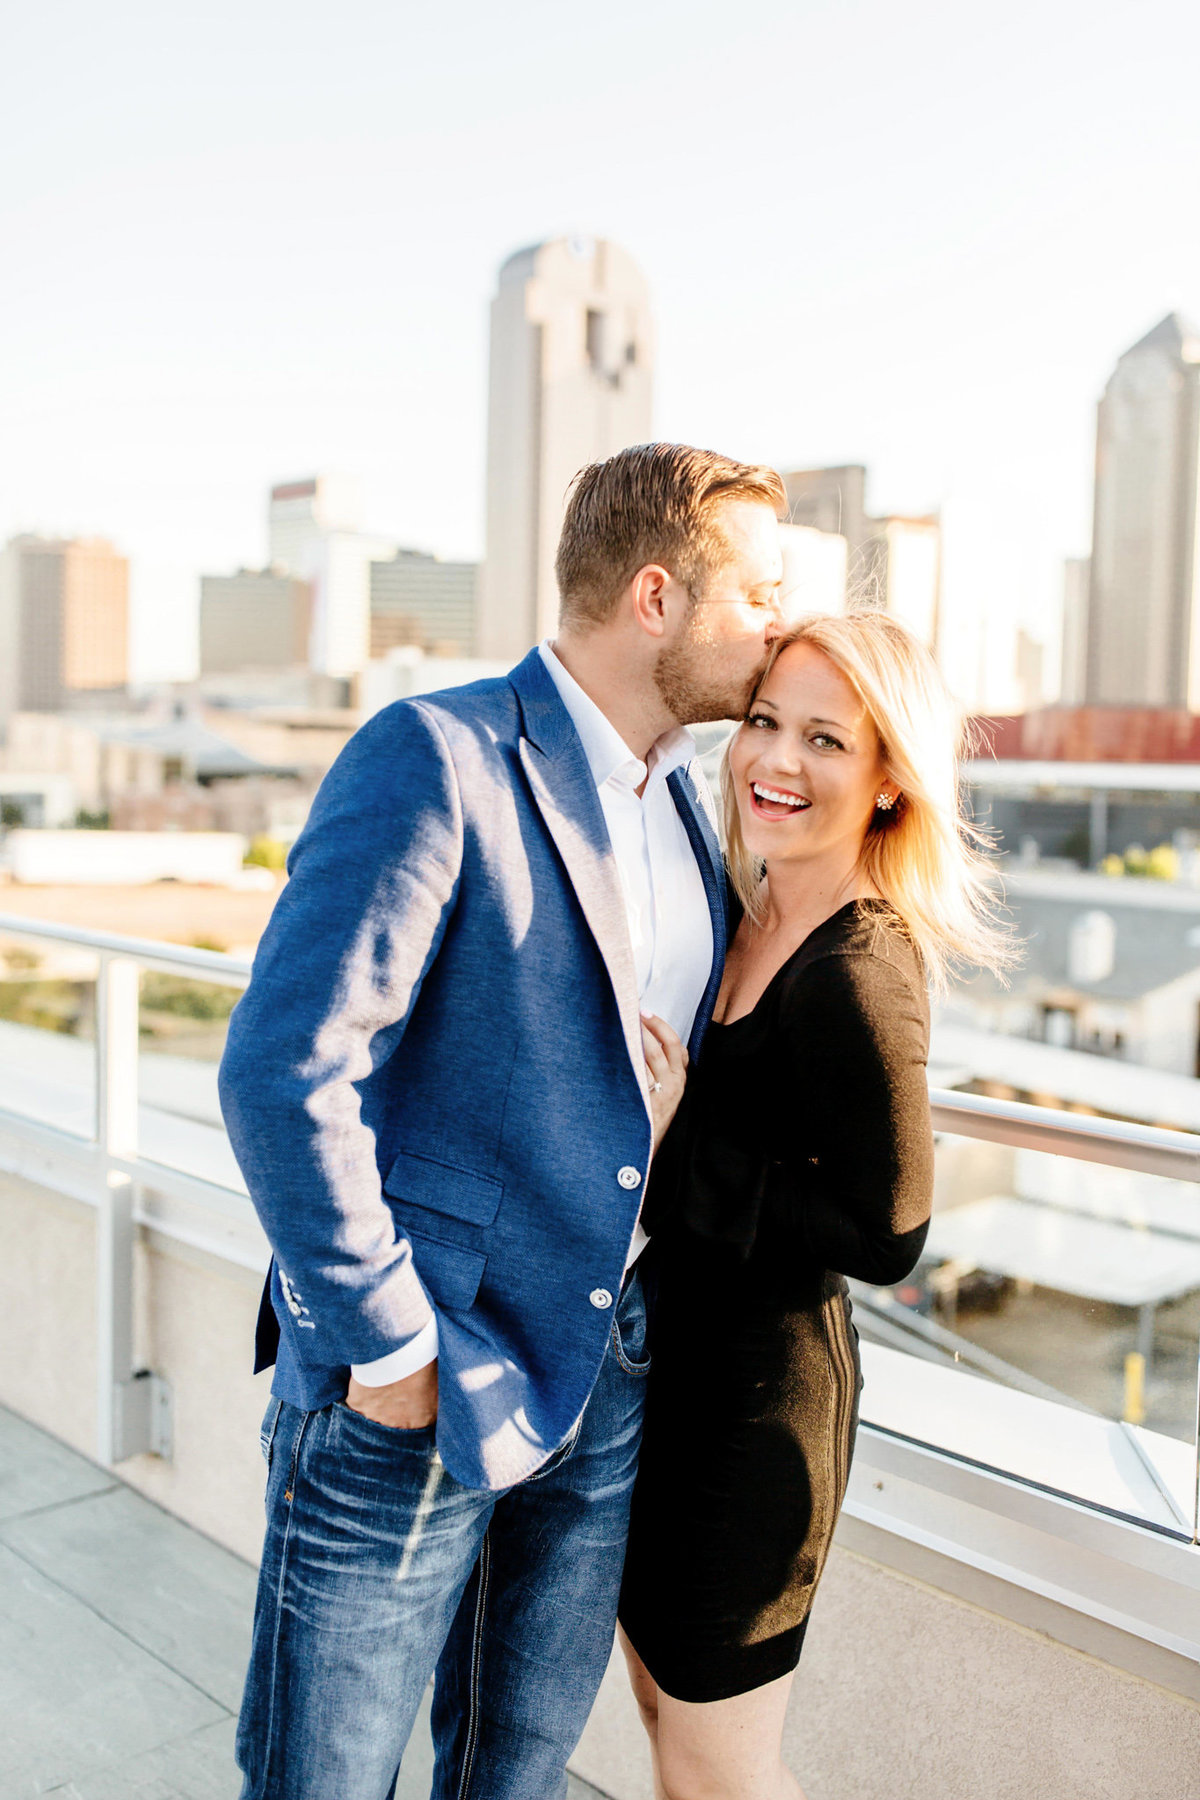 Eric & Megan - Downtown Dallas Rooftop Proposal & Engagement Session-68